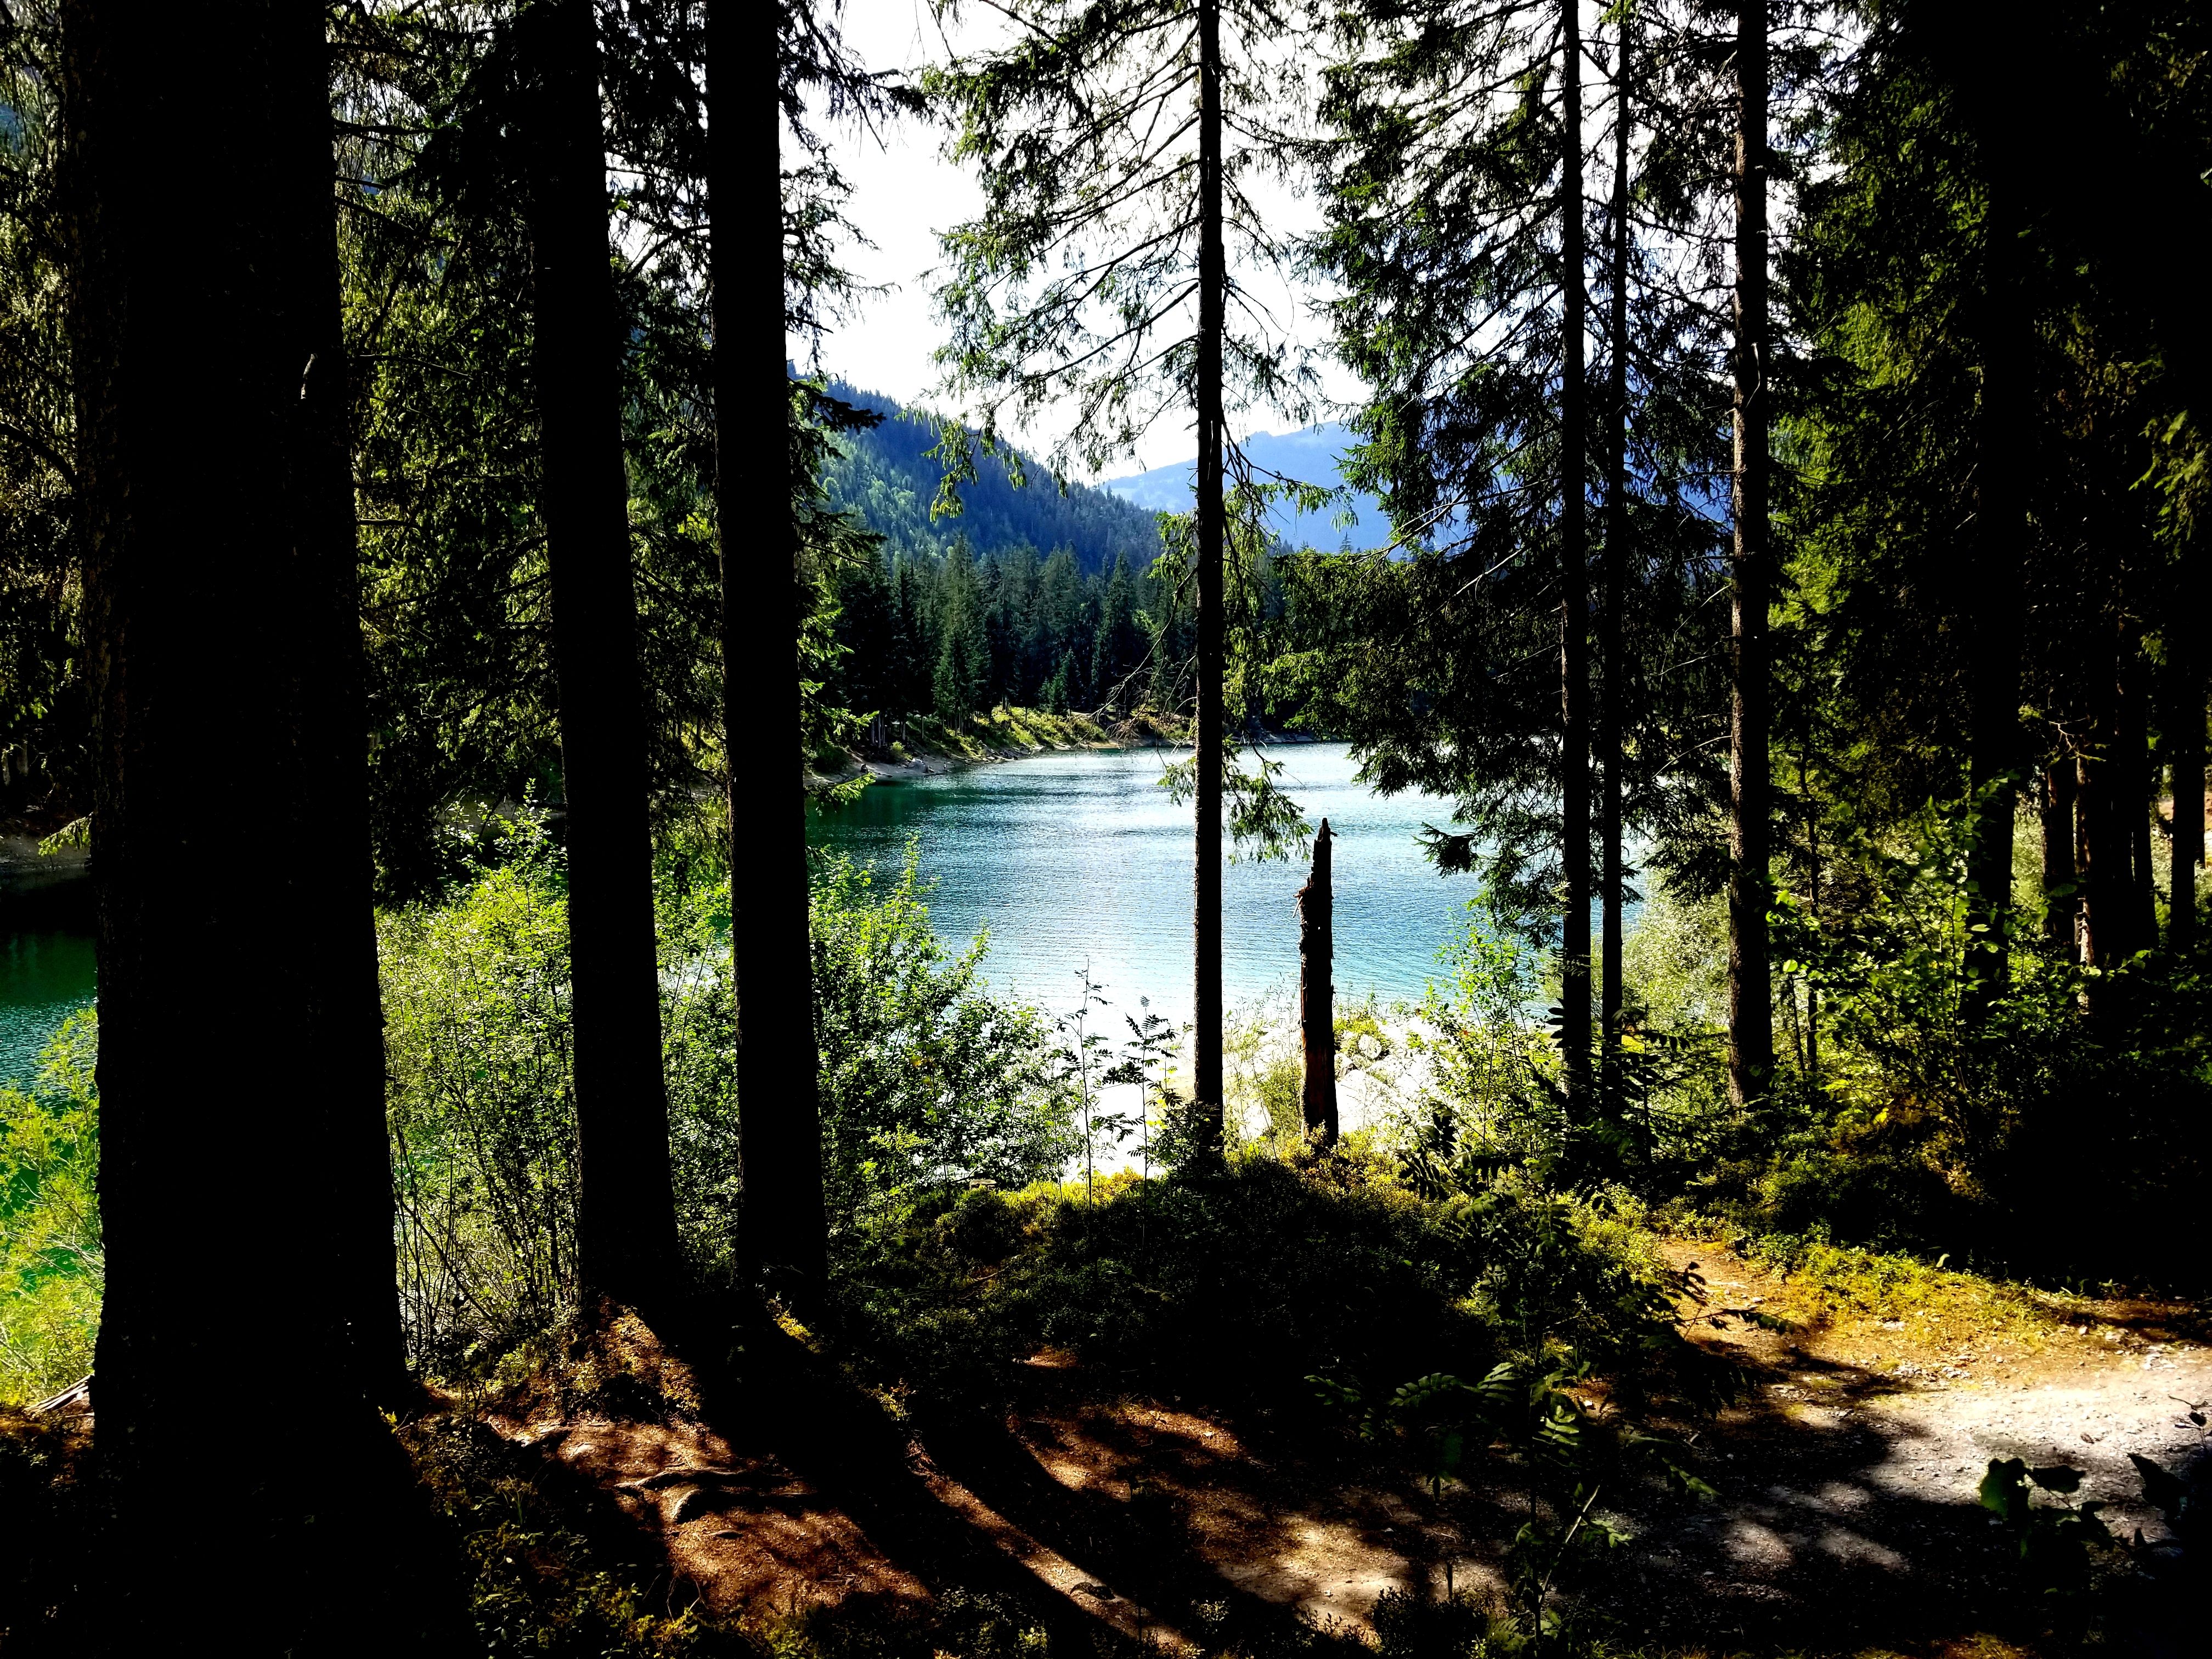 A lake between trees in Flims, Switzerland